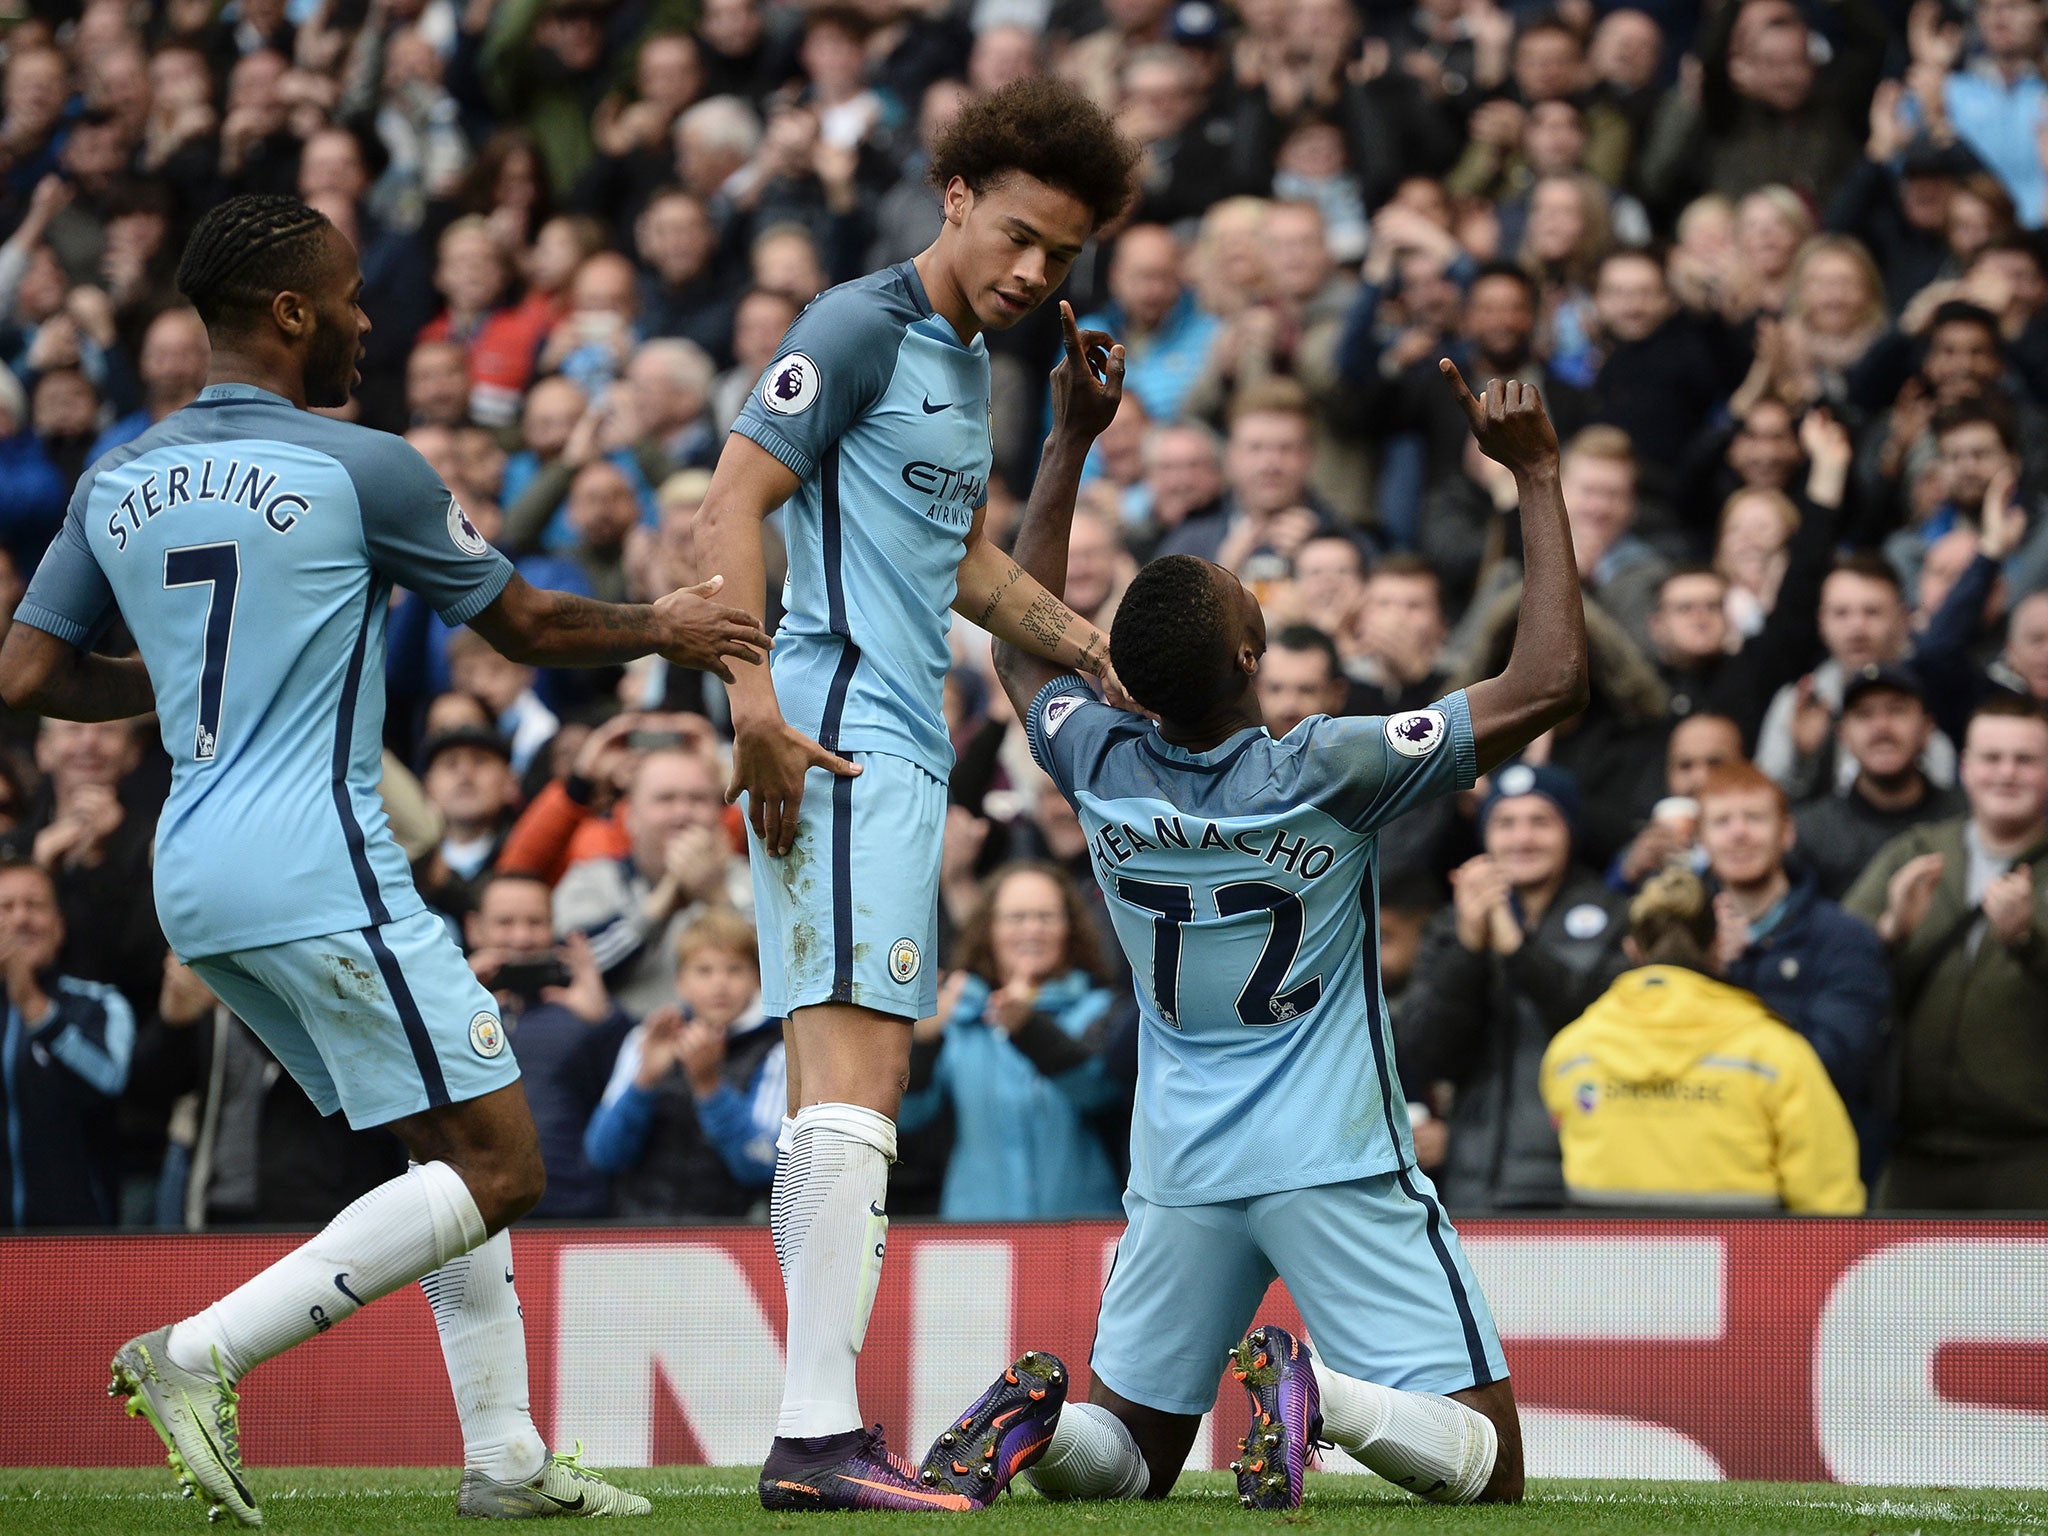 The likes of Leroy Sane, Raheem Sterling and Kelechi Iheanacho can all expect to play a role in the years to come at City